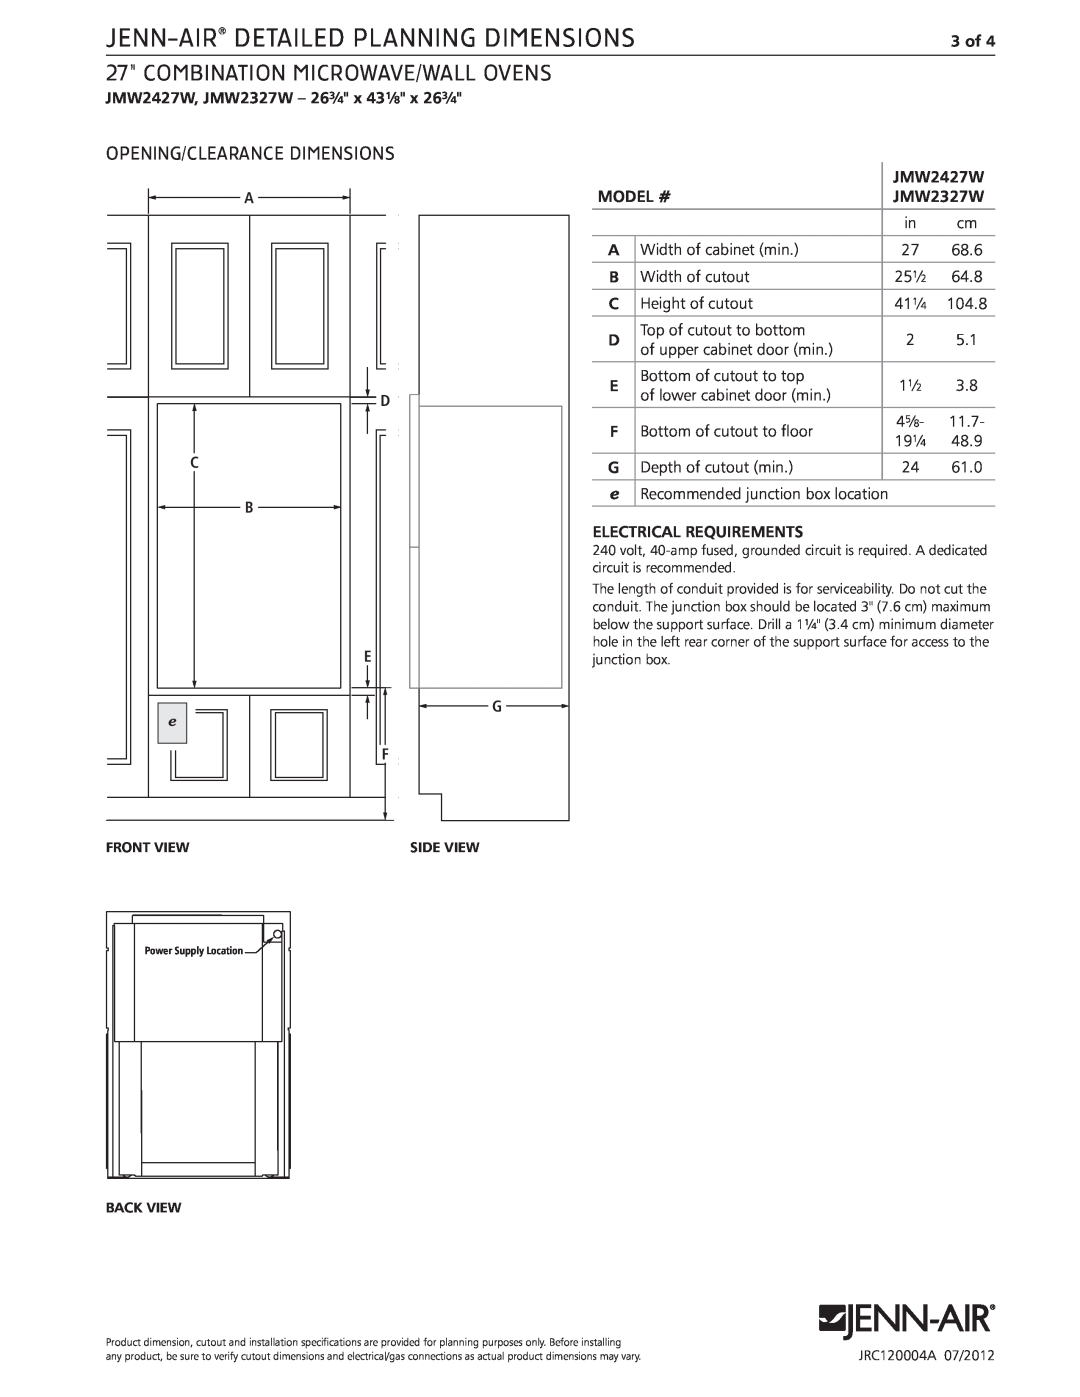 Jenn-Air JMW2327W Opening/Clearance Dimensions, Jenn-Air Detailed Planning Dimensions, combination microwave/wall ovens 